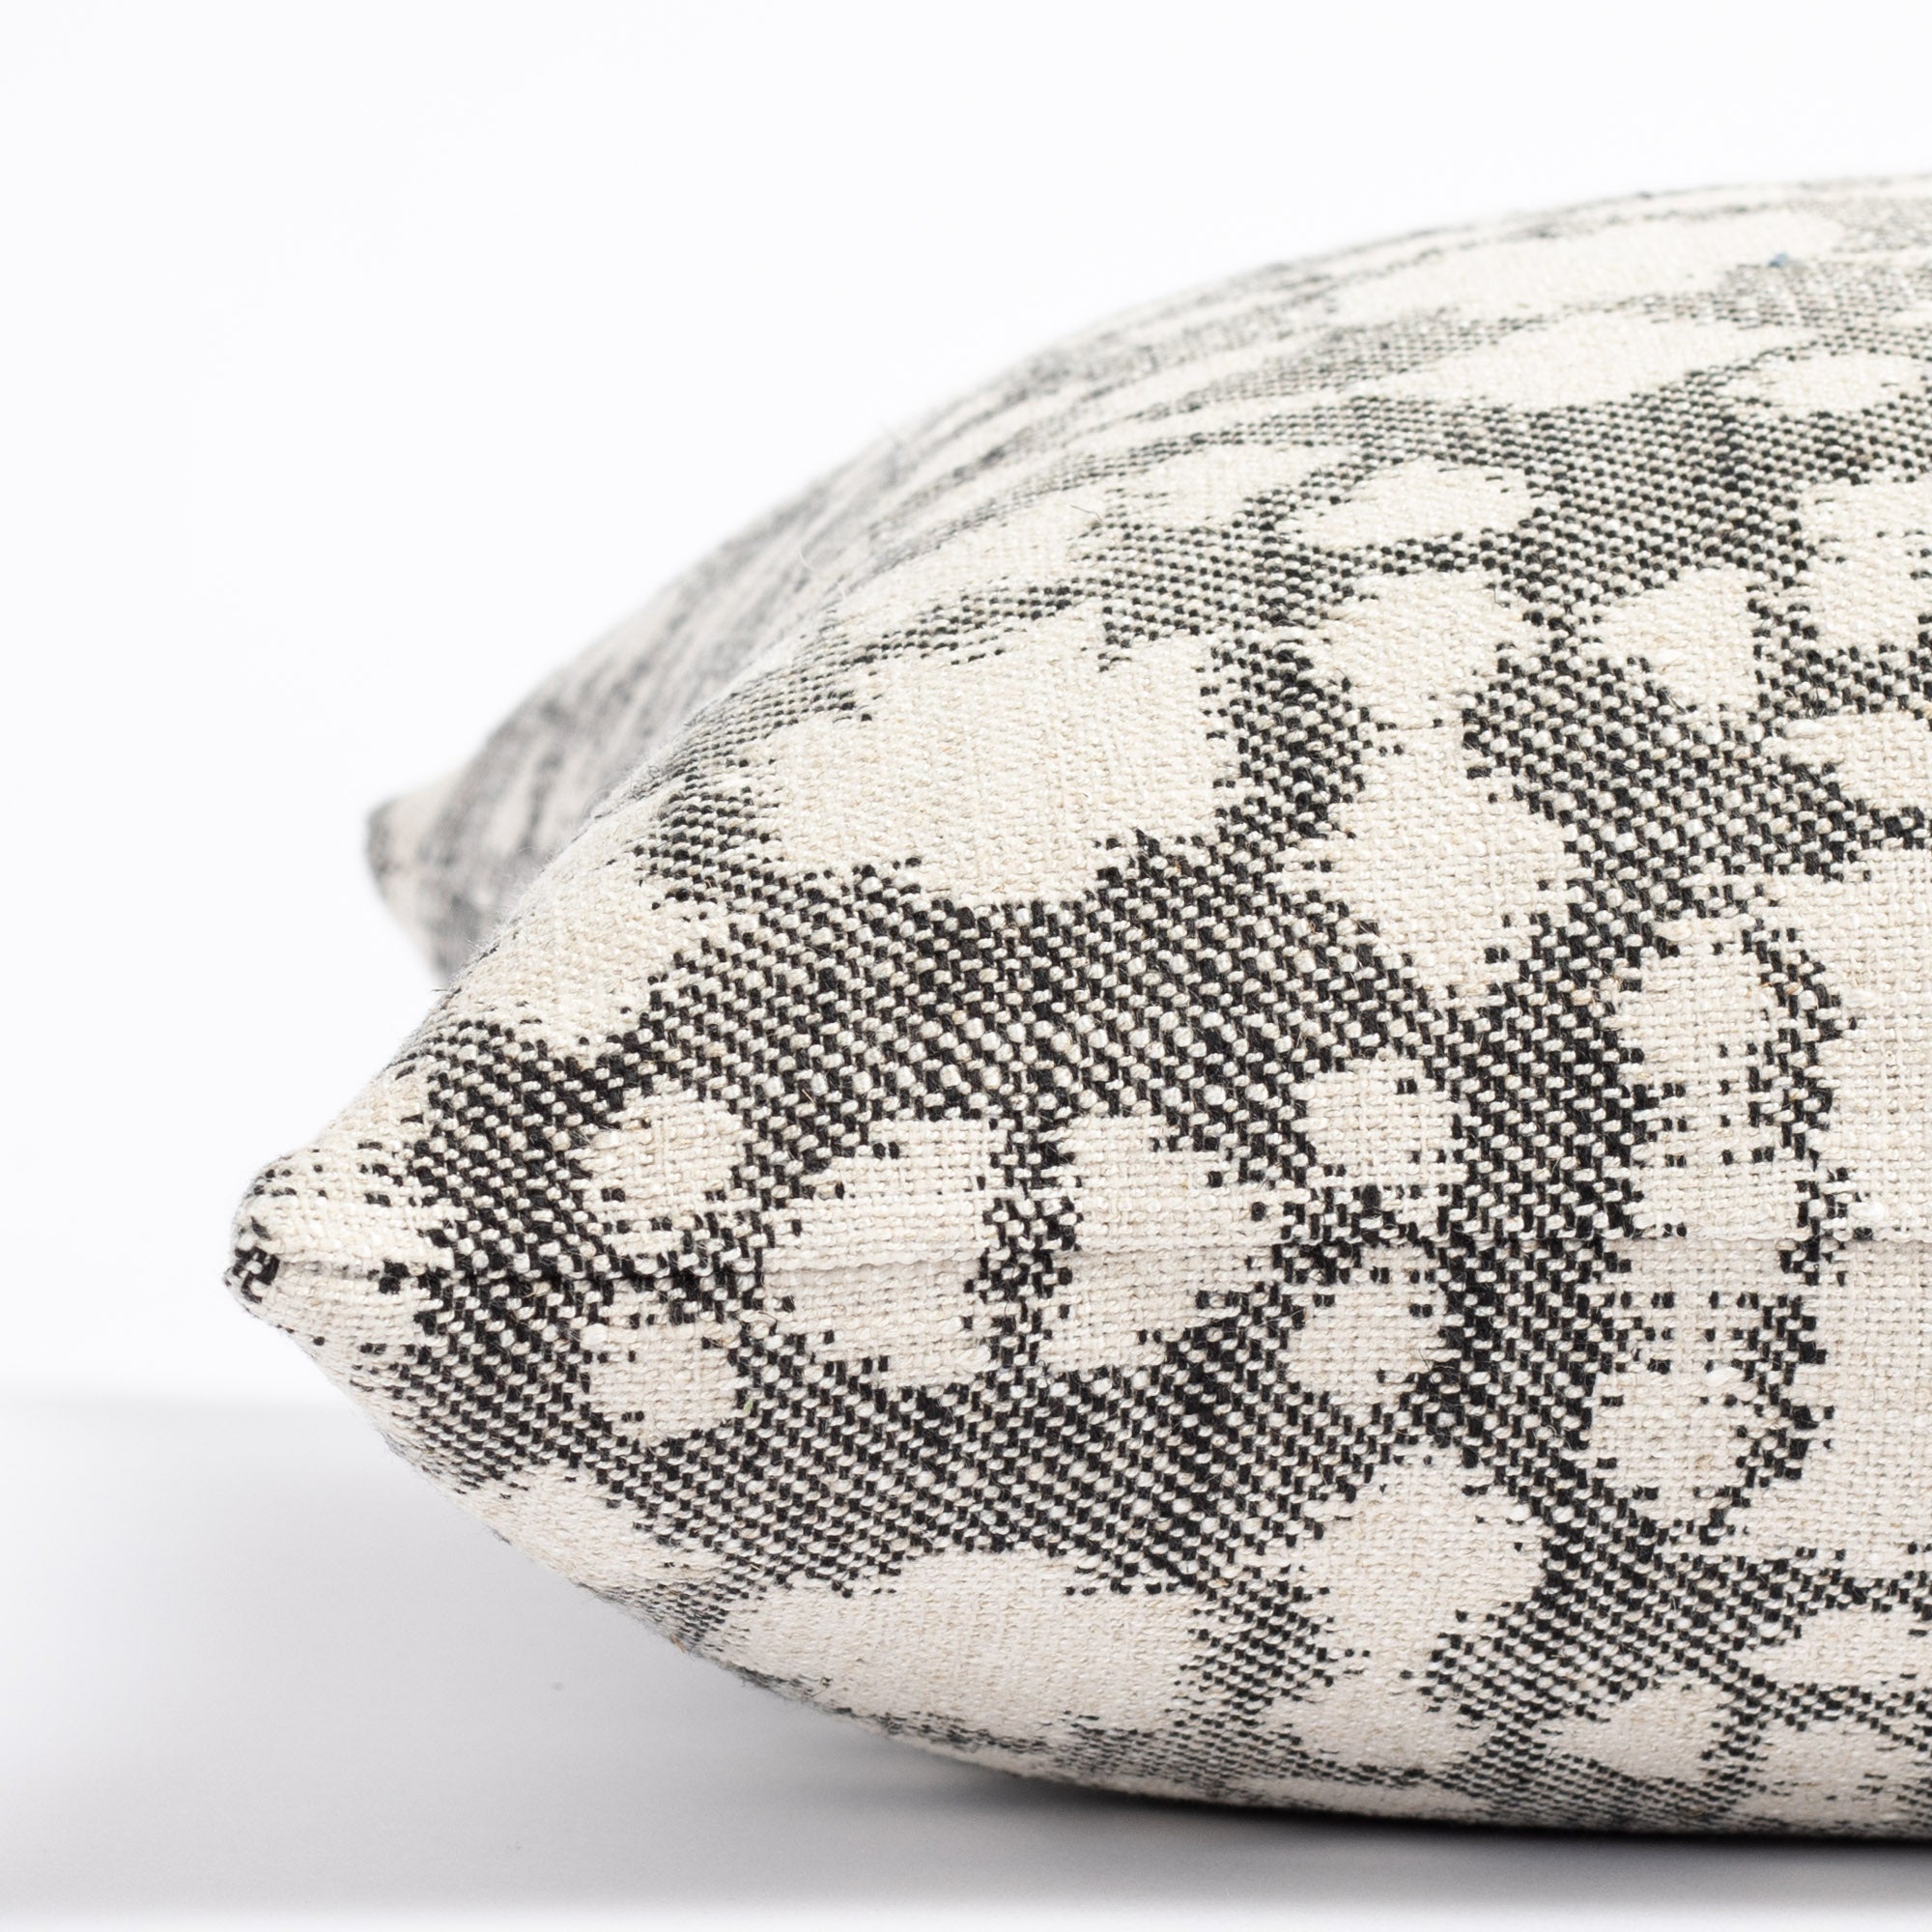 an abstract botanical patterned throw pillow : close up side view